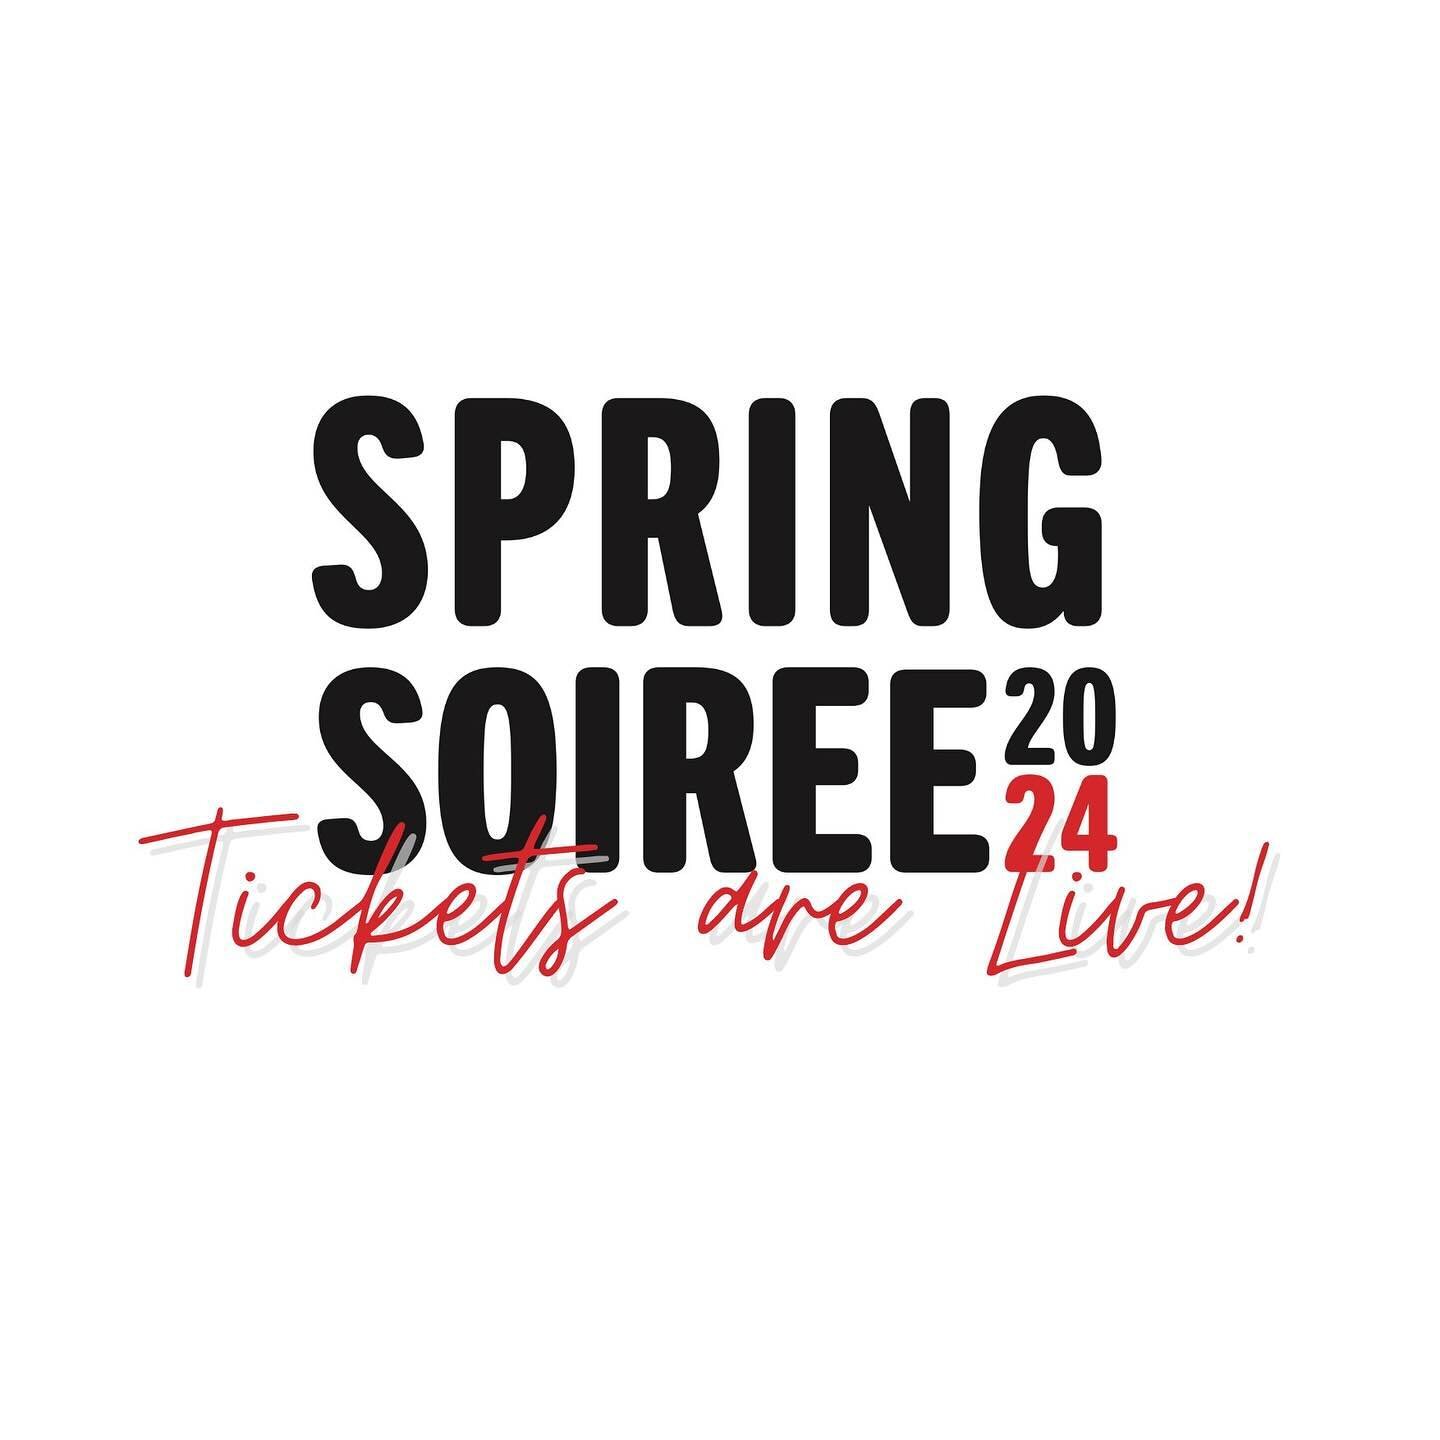 Ticket sales are LIVE! 🎉🎉🎉 Grab your seat for this year's Spring Soiree! 

Registration pro tips:
- Individual Tickets are $50, Tables are $400. Purchasing a table ensures you pick who you sit with! Tables seat 8.
- Would your business like to spo